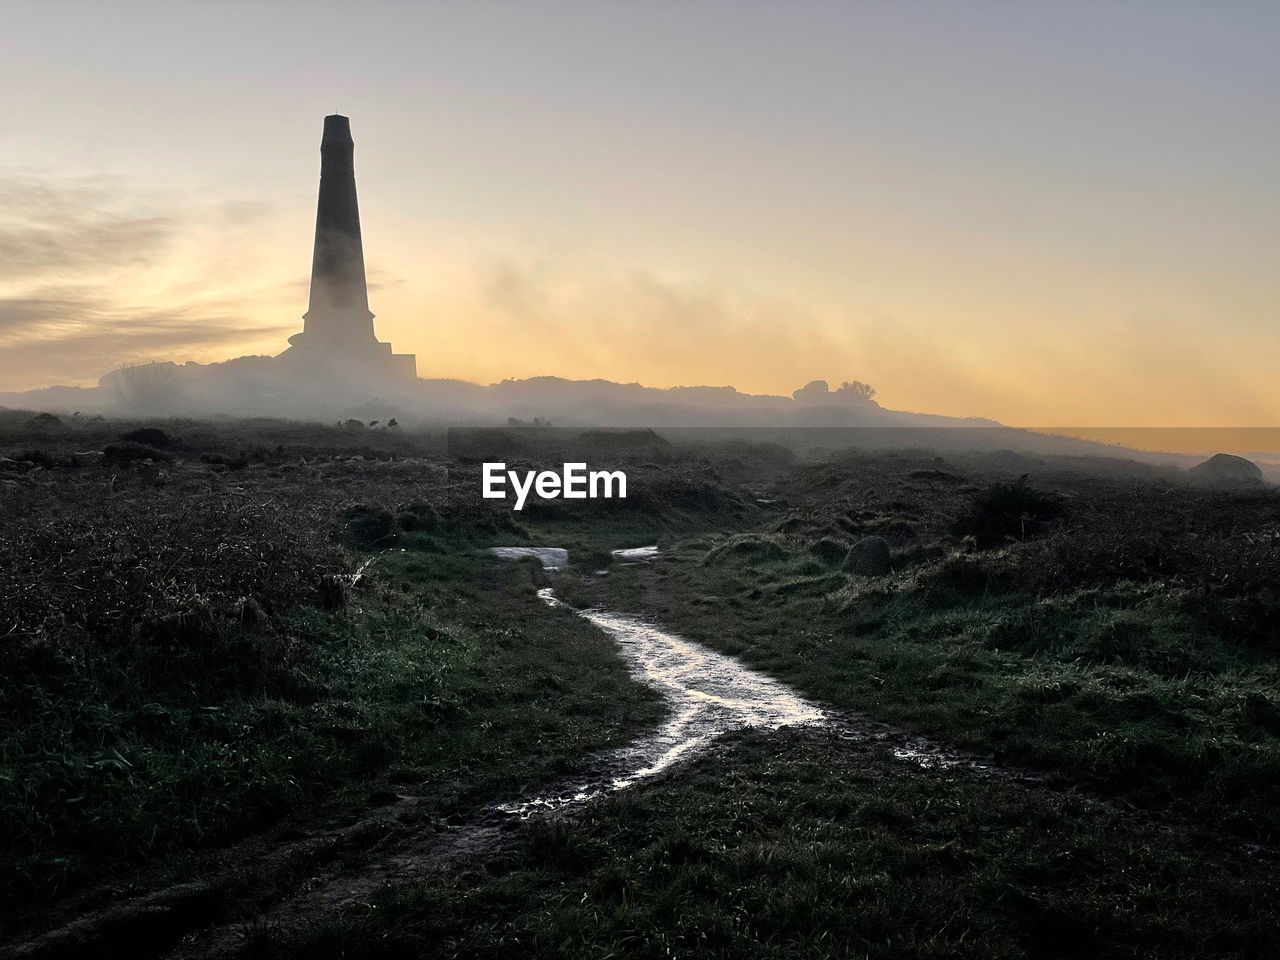 Carn brea monument, almost submerged in light fog, moment before sunset